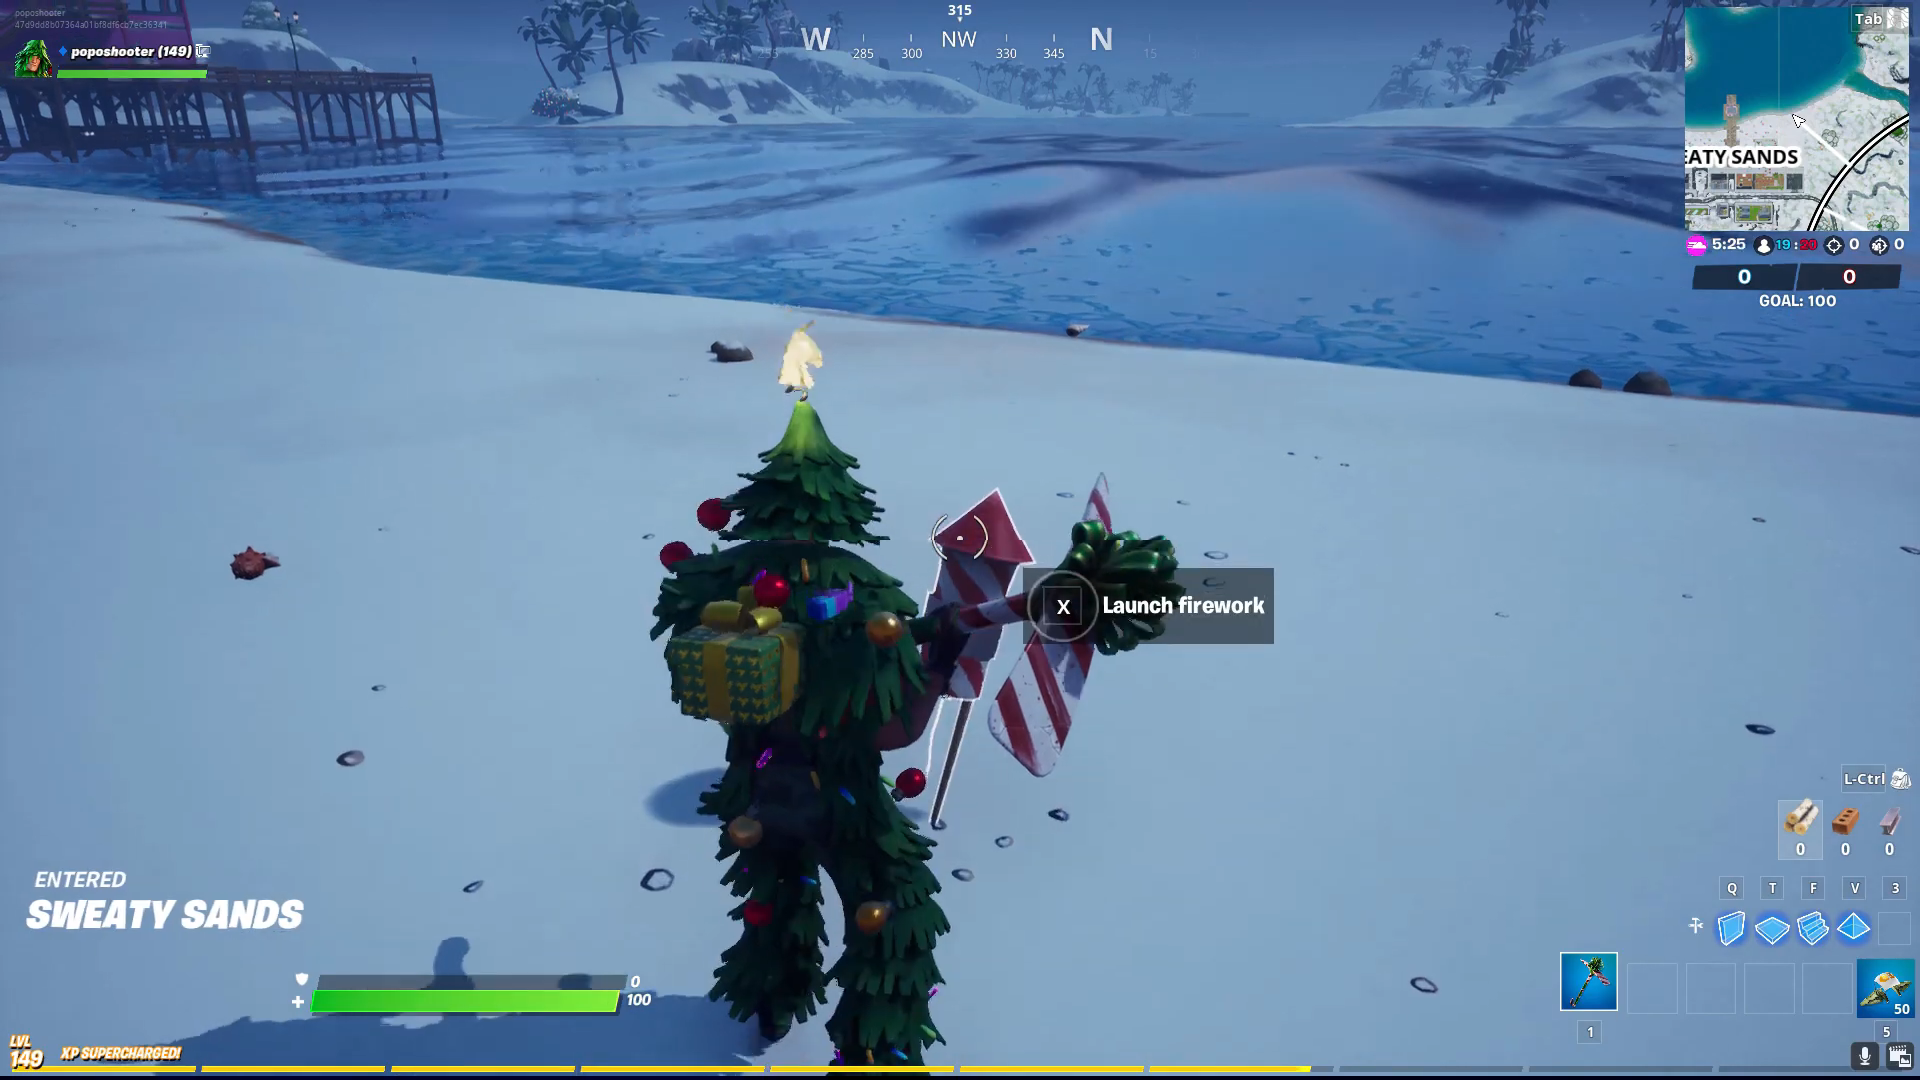 Fortnite Cant Find Fire Works Fortnite Frozen Firework Locations To Light At Sweaty Sands Craggy Cliffs